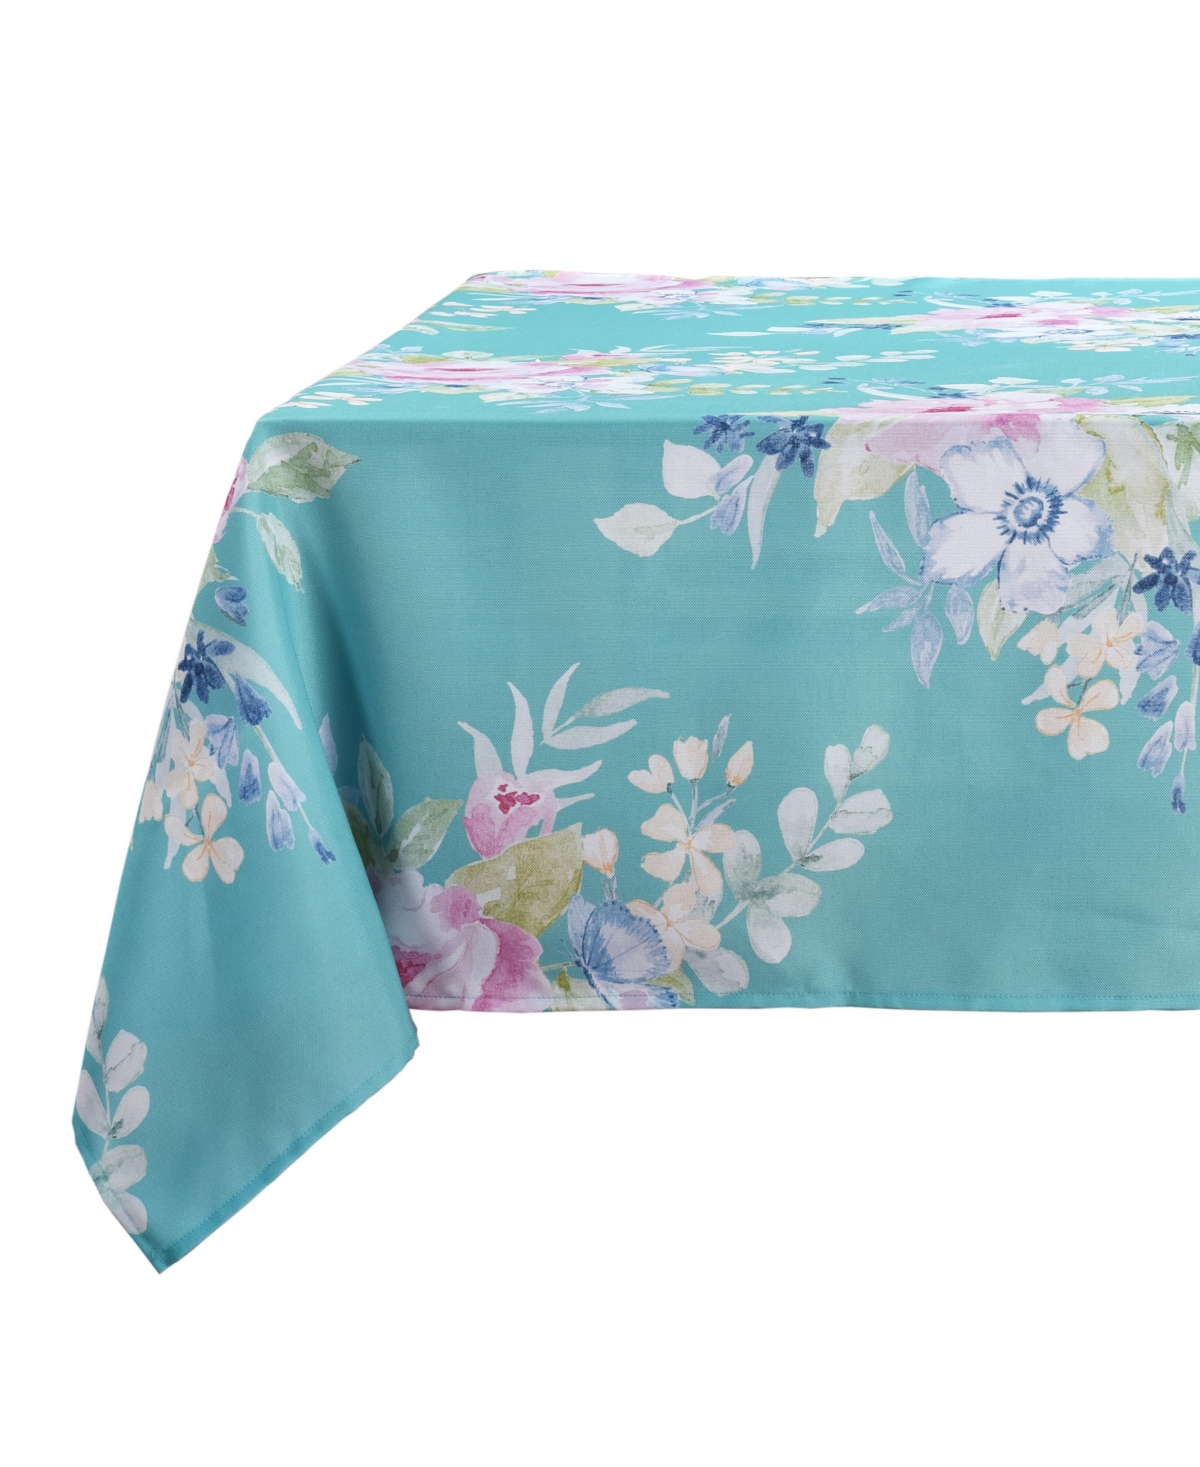 J Queen New York Esme Tablecloth 60 X 102 In Turquoise